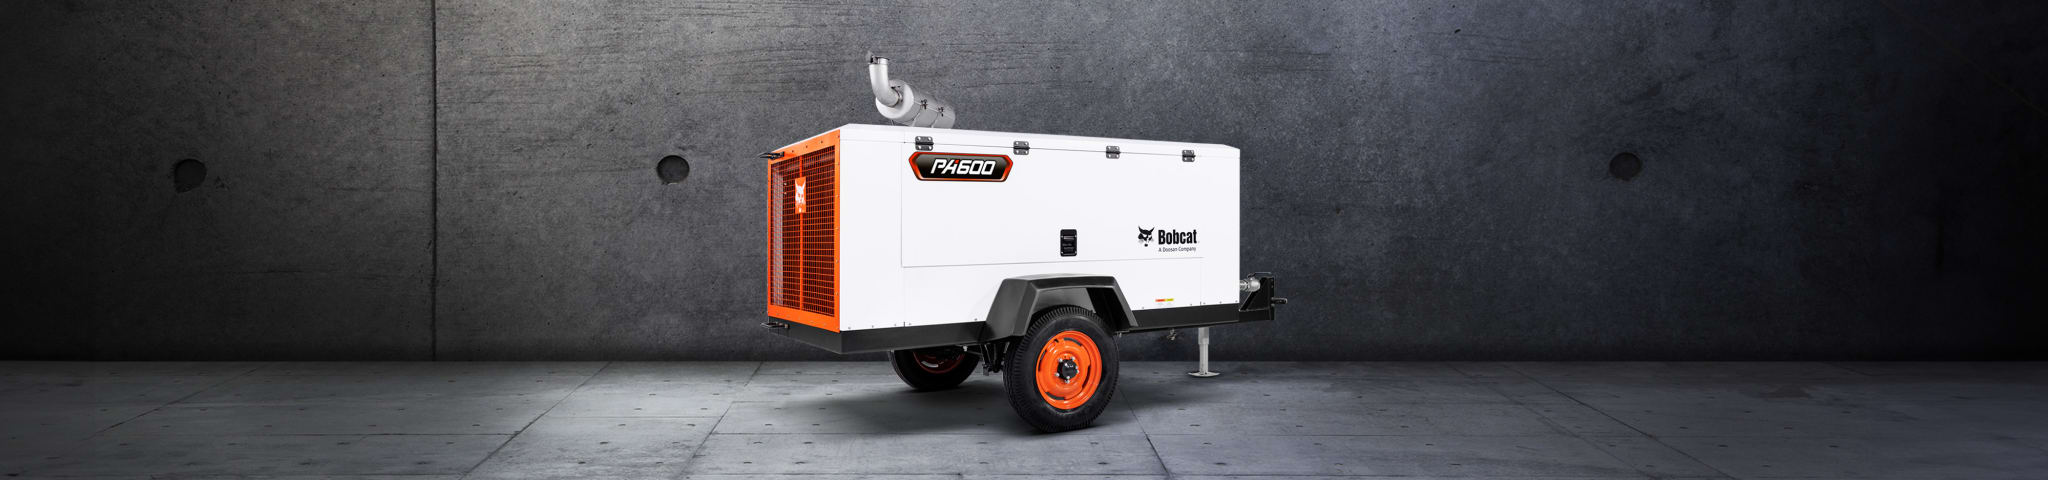 READY & RELIABLE AIR COMPRESSORS